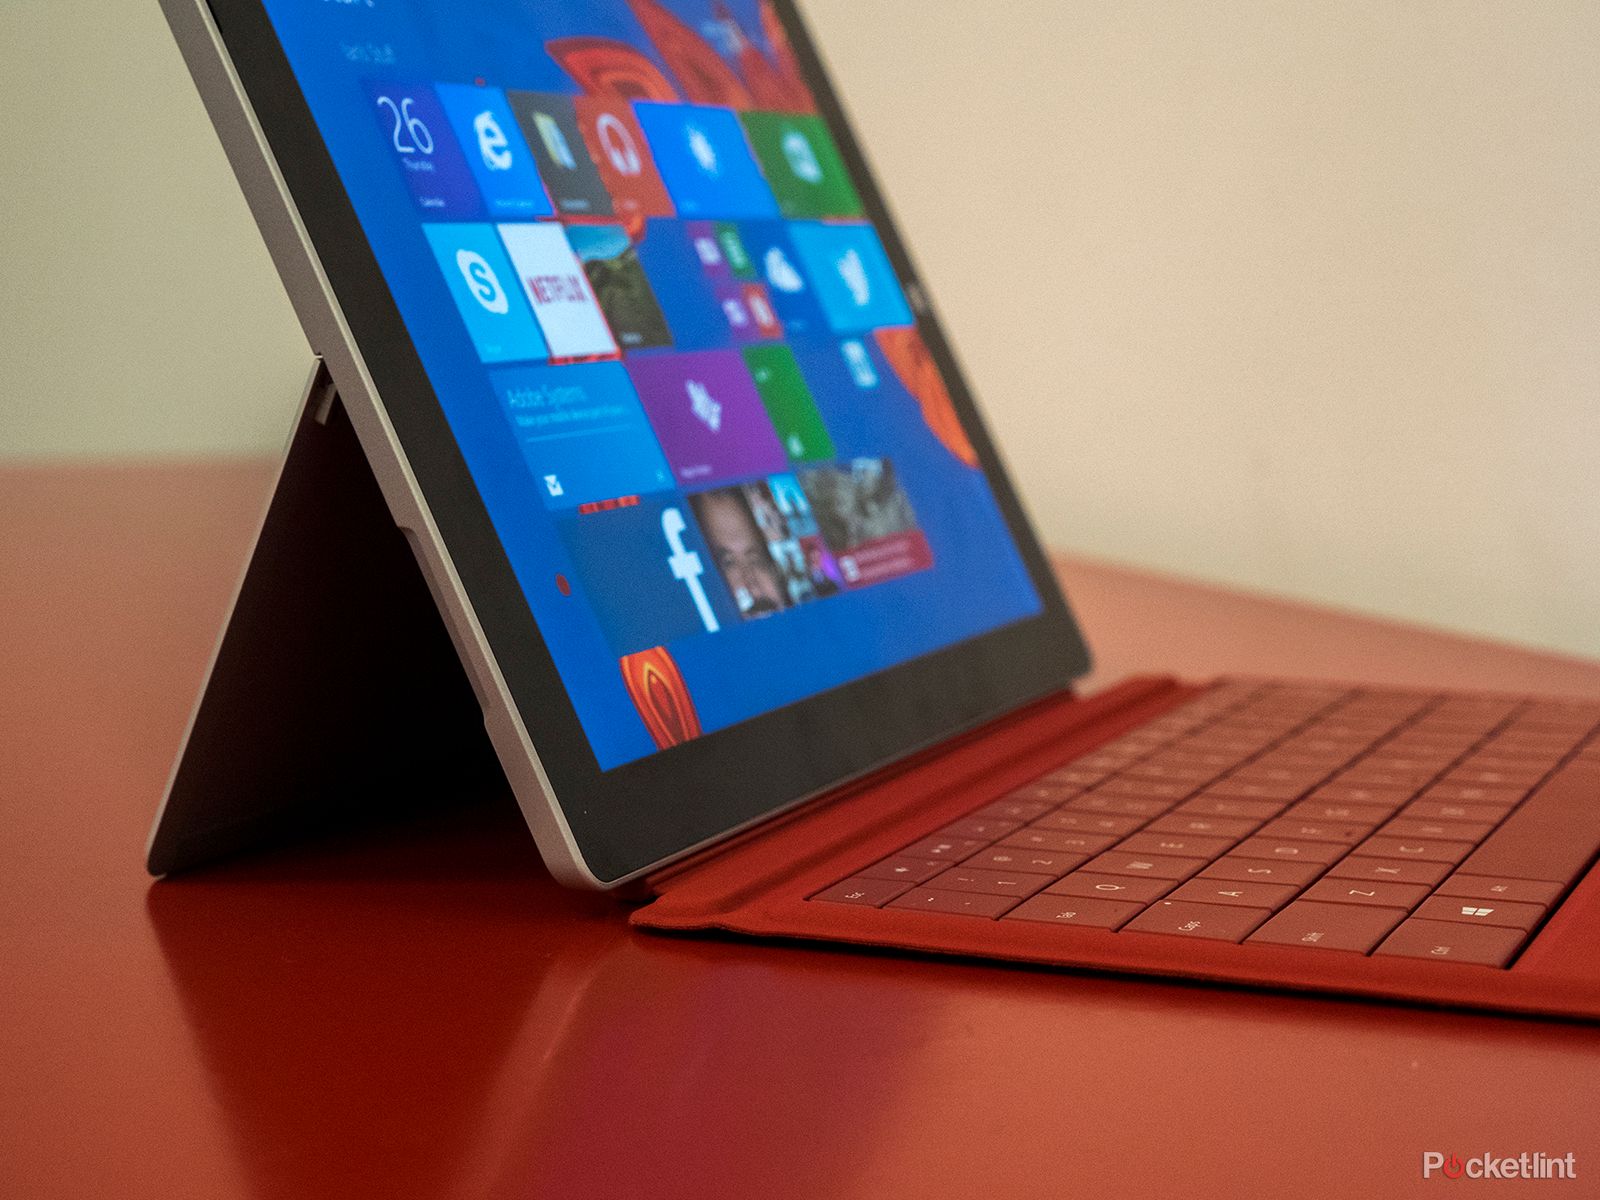 microsoft surface 3 10 8 inch hd screen full windows 8 1 50 cheaper than the pro 3 hands on image 14